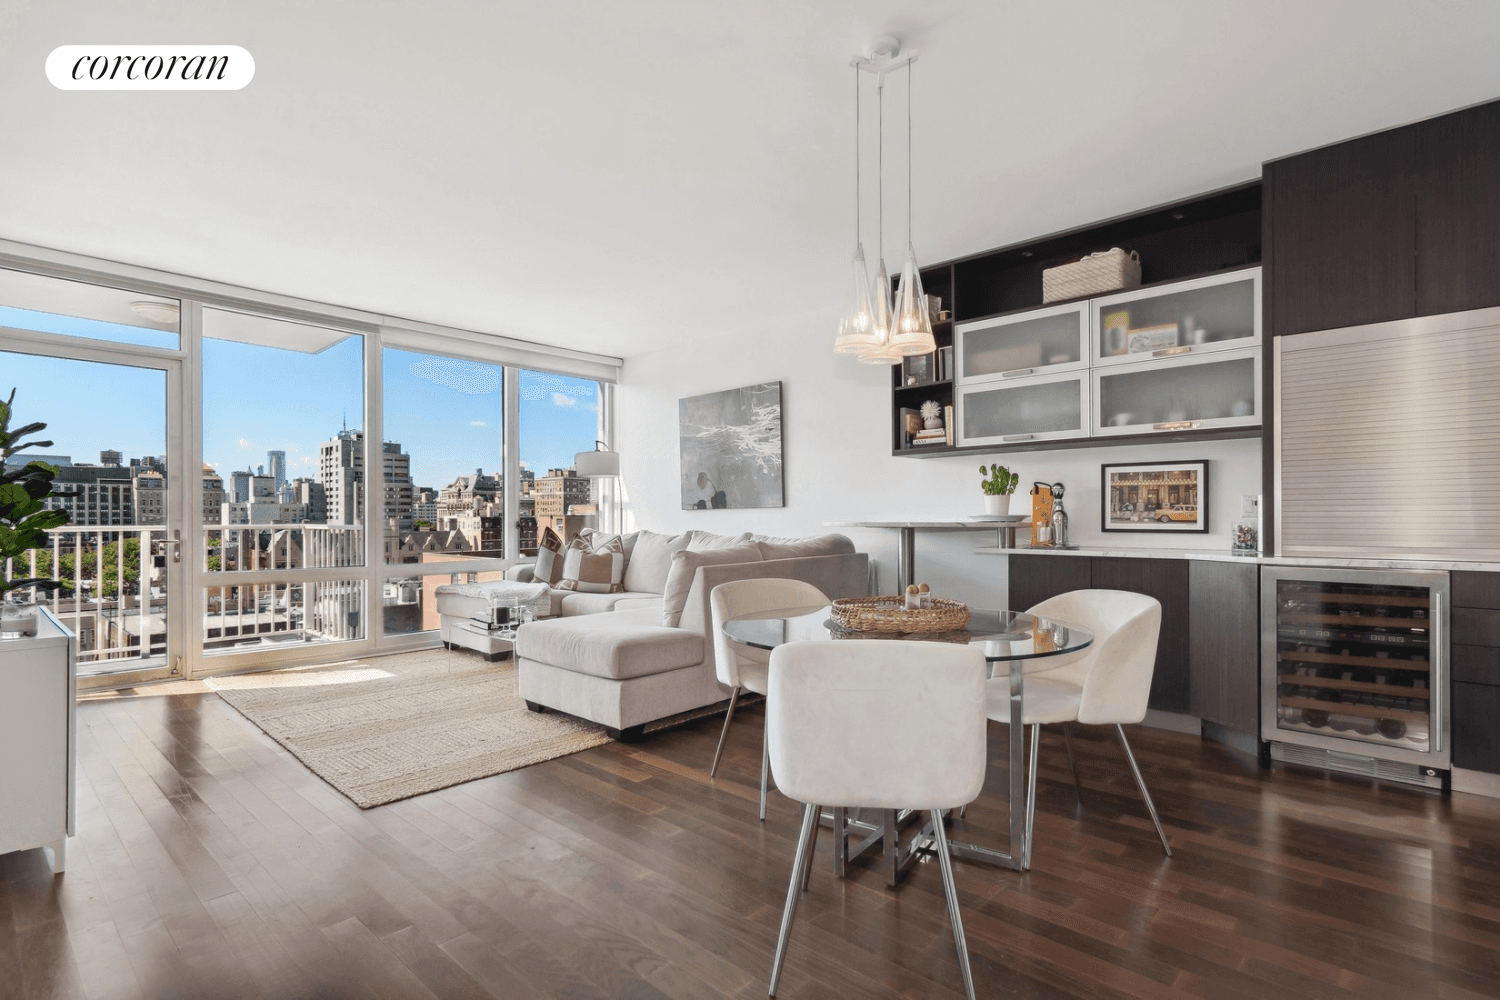 Experience breathtaking cityscape views from this sun filled oasis boasting oversized floor to ceiling windows and a private balcony.